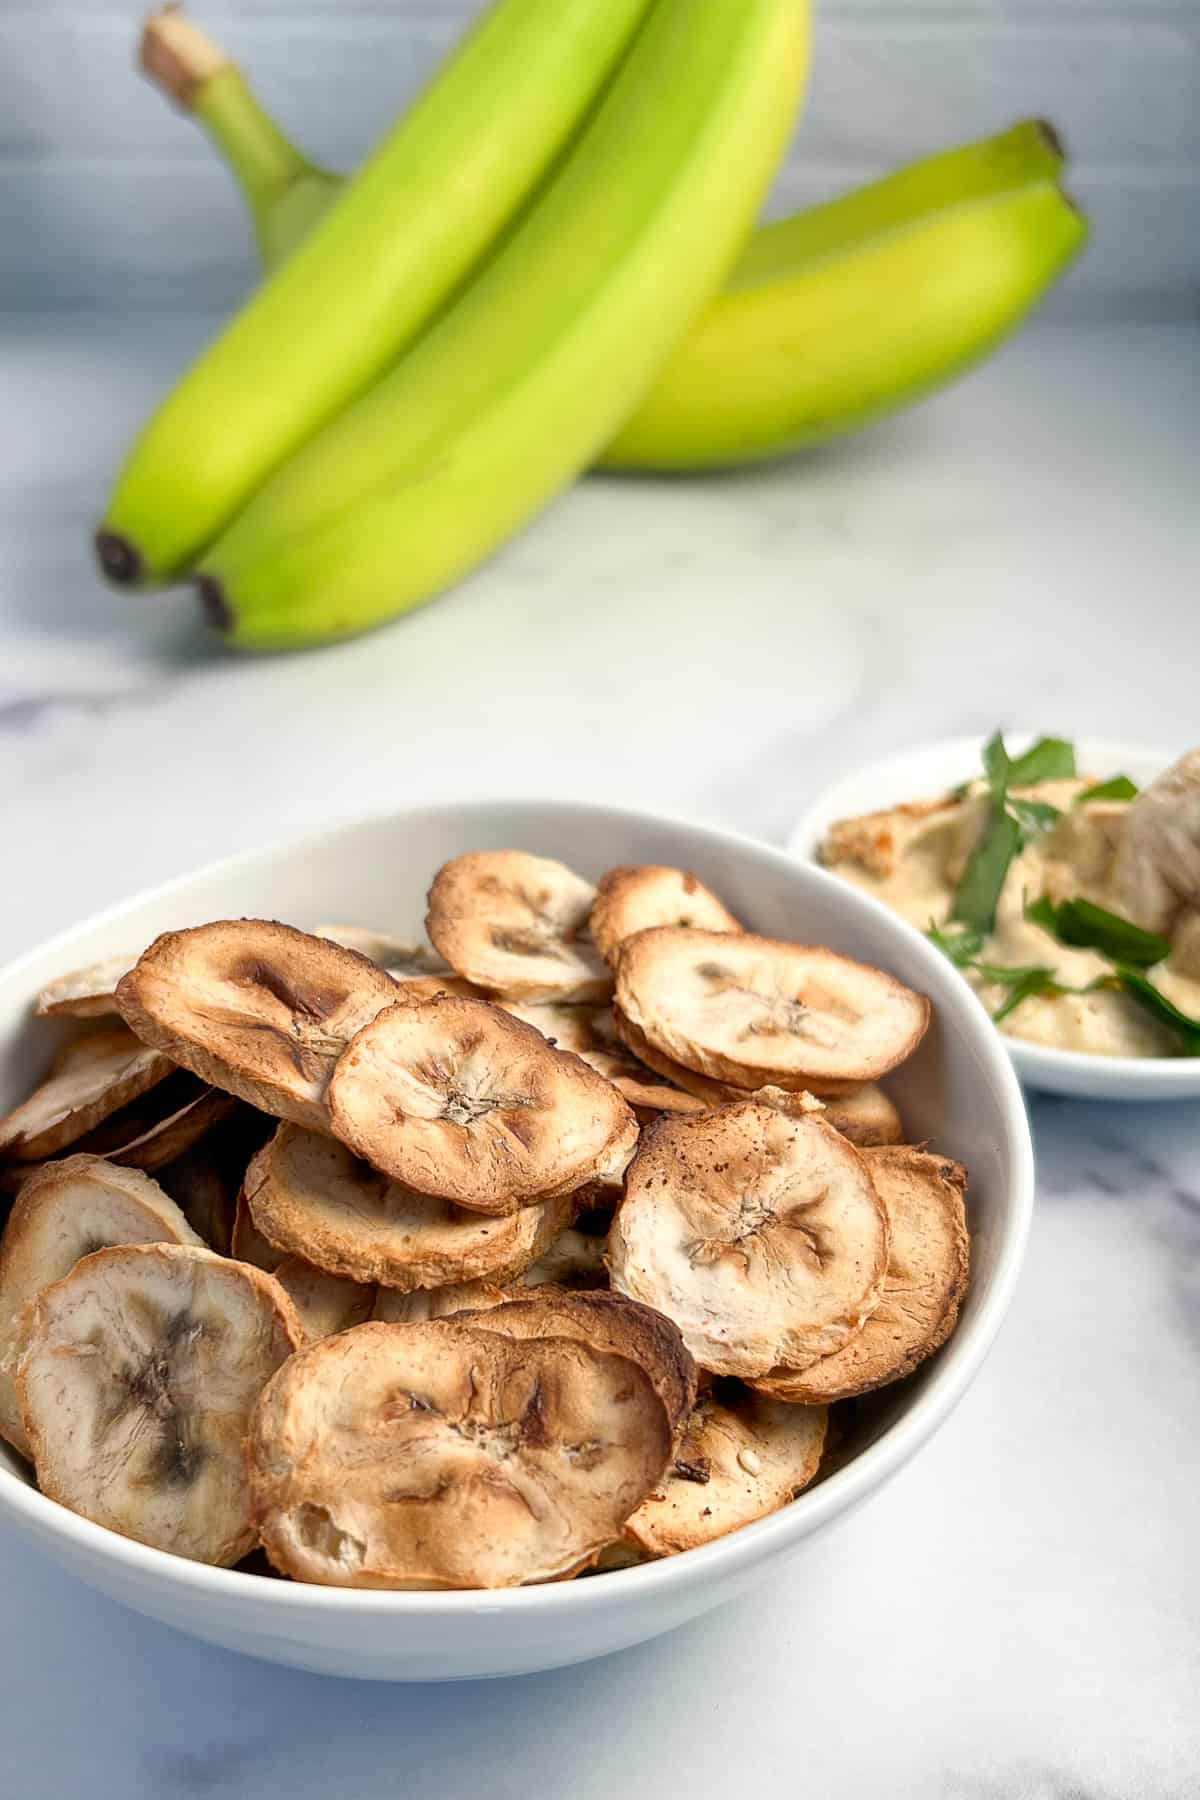 bowl of oil free savory air fryer banana chips in a white bowl with green bananas and a small bowl of hummus with fresh parsley blurred in the background